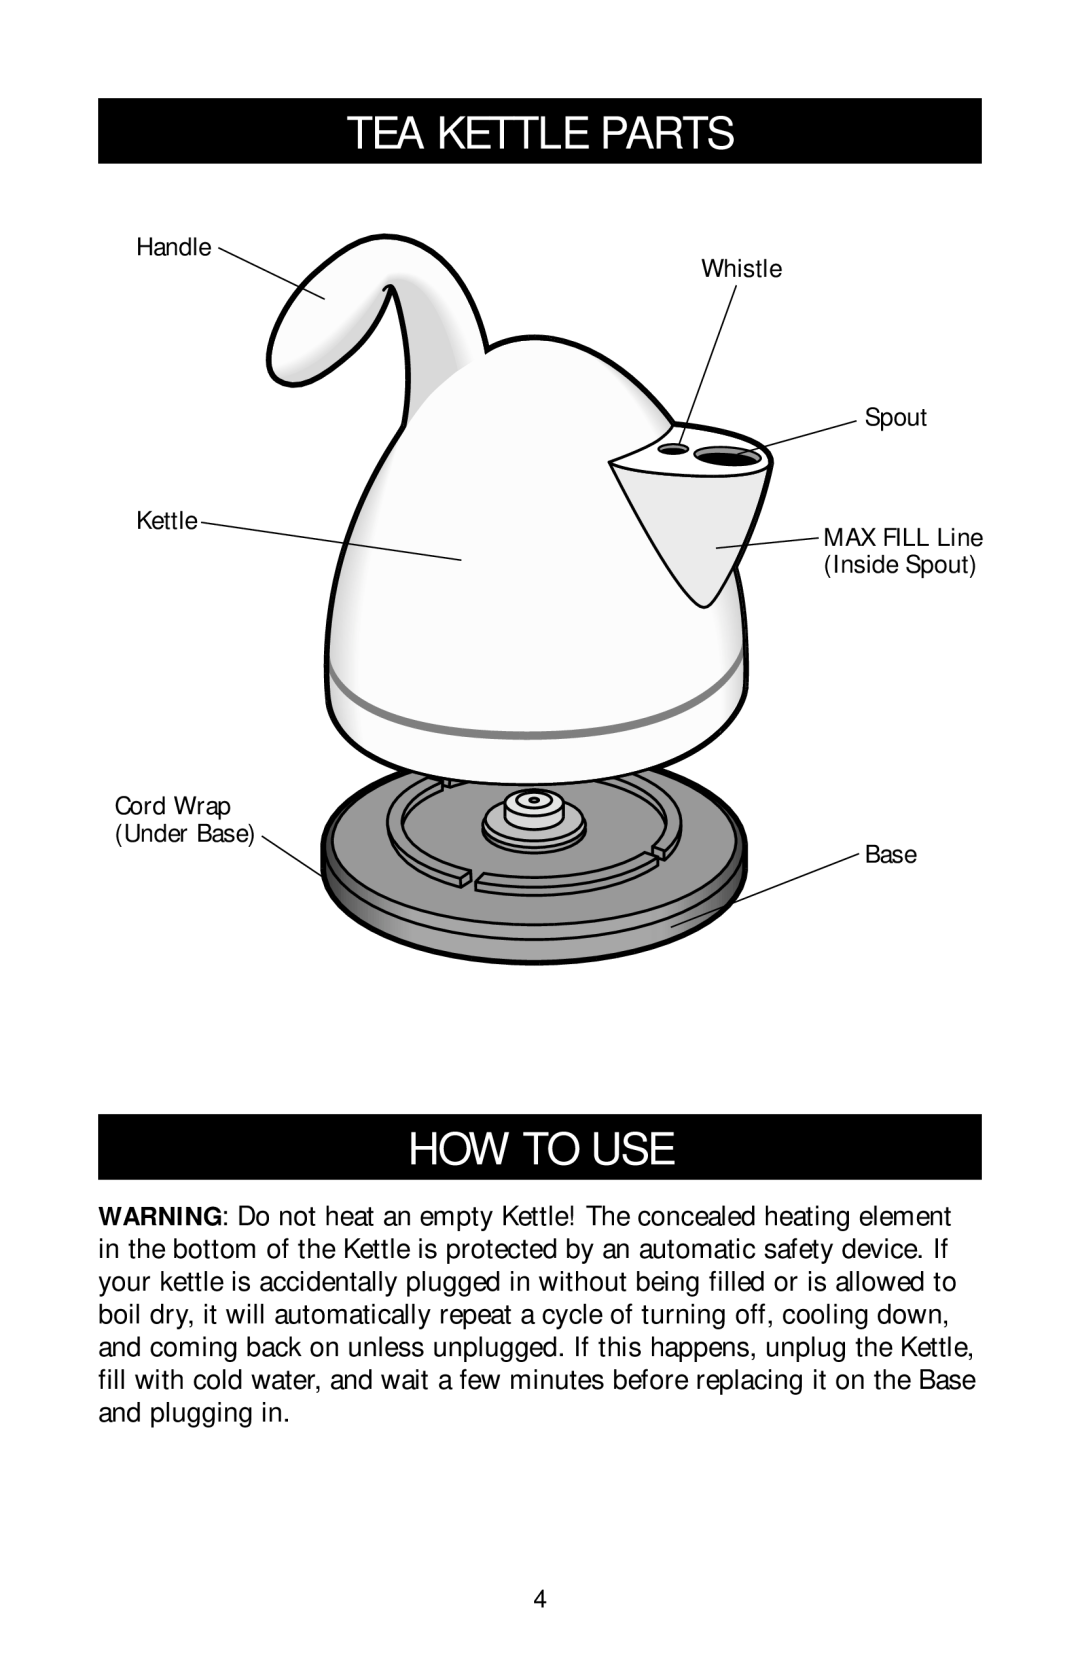 Black & Decker MDG550 owner manual Tea Kettle Parts, How To Use, Handle Whistle, Spout, Cord Wrap Under Base Base 